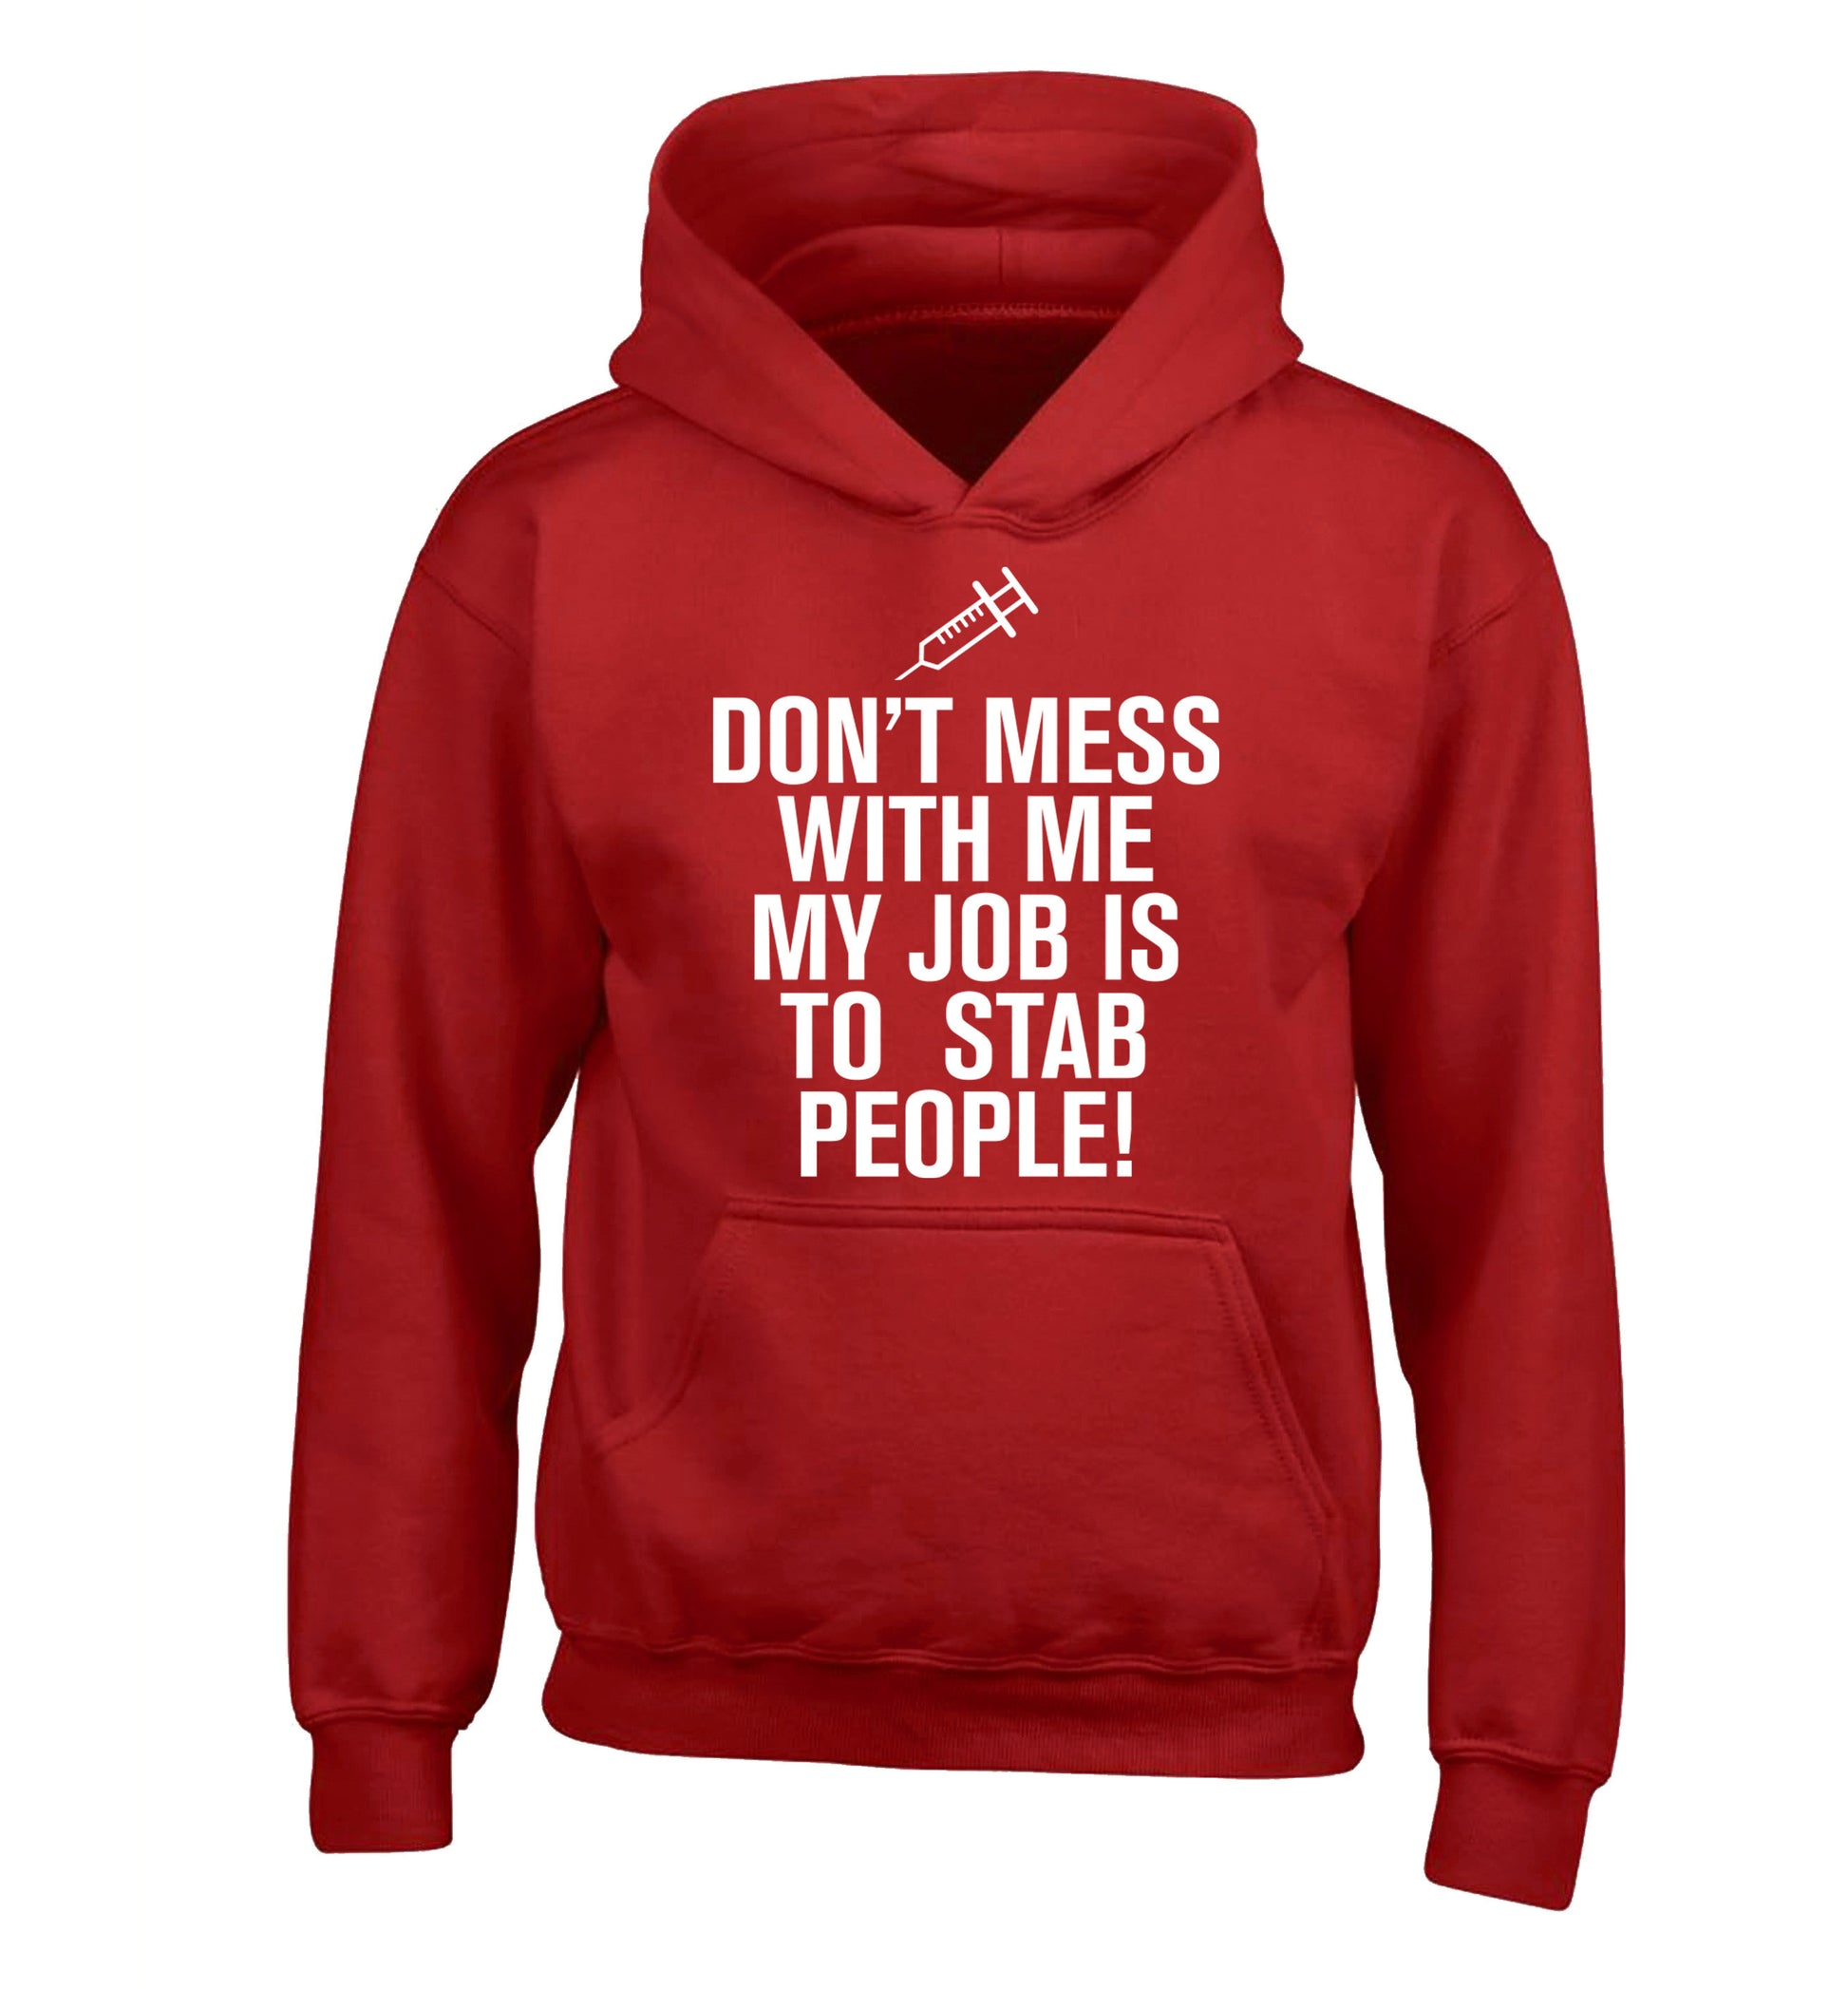 Don't mess with me my job is to stab people! children's red hoodie 12-14 Years